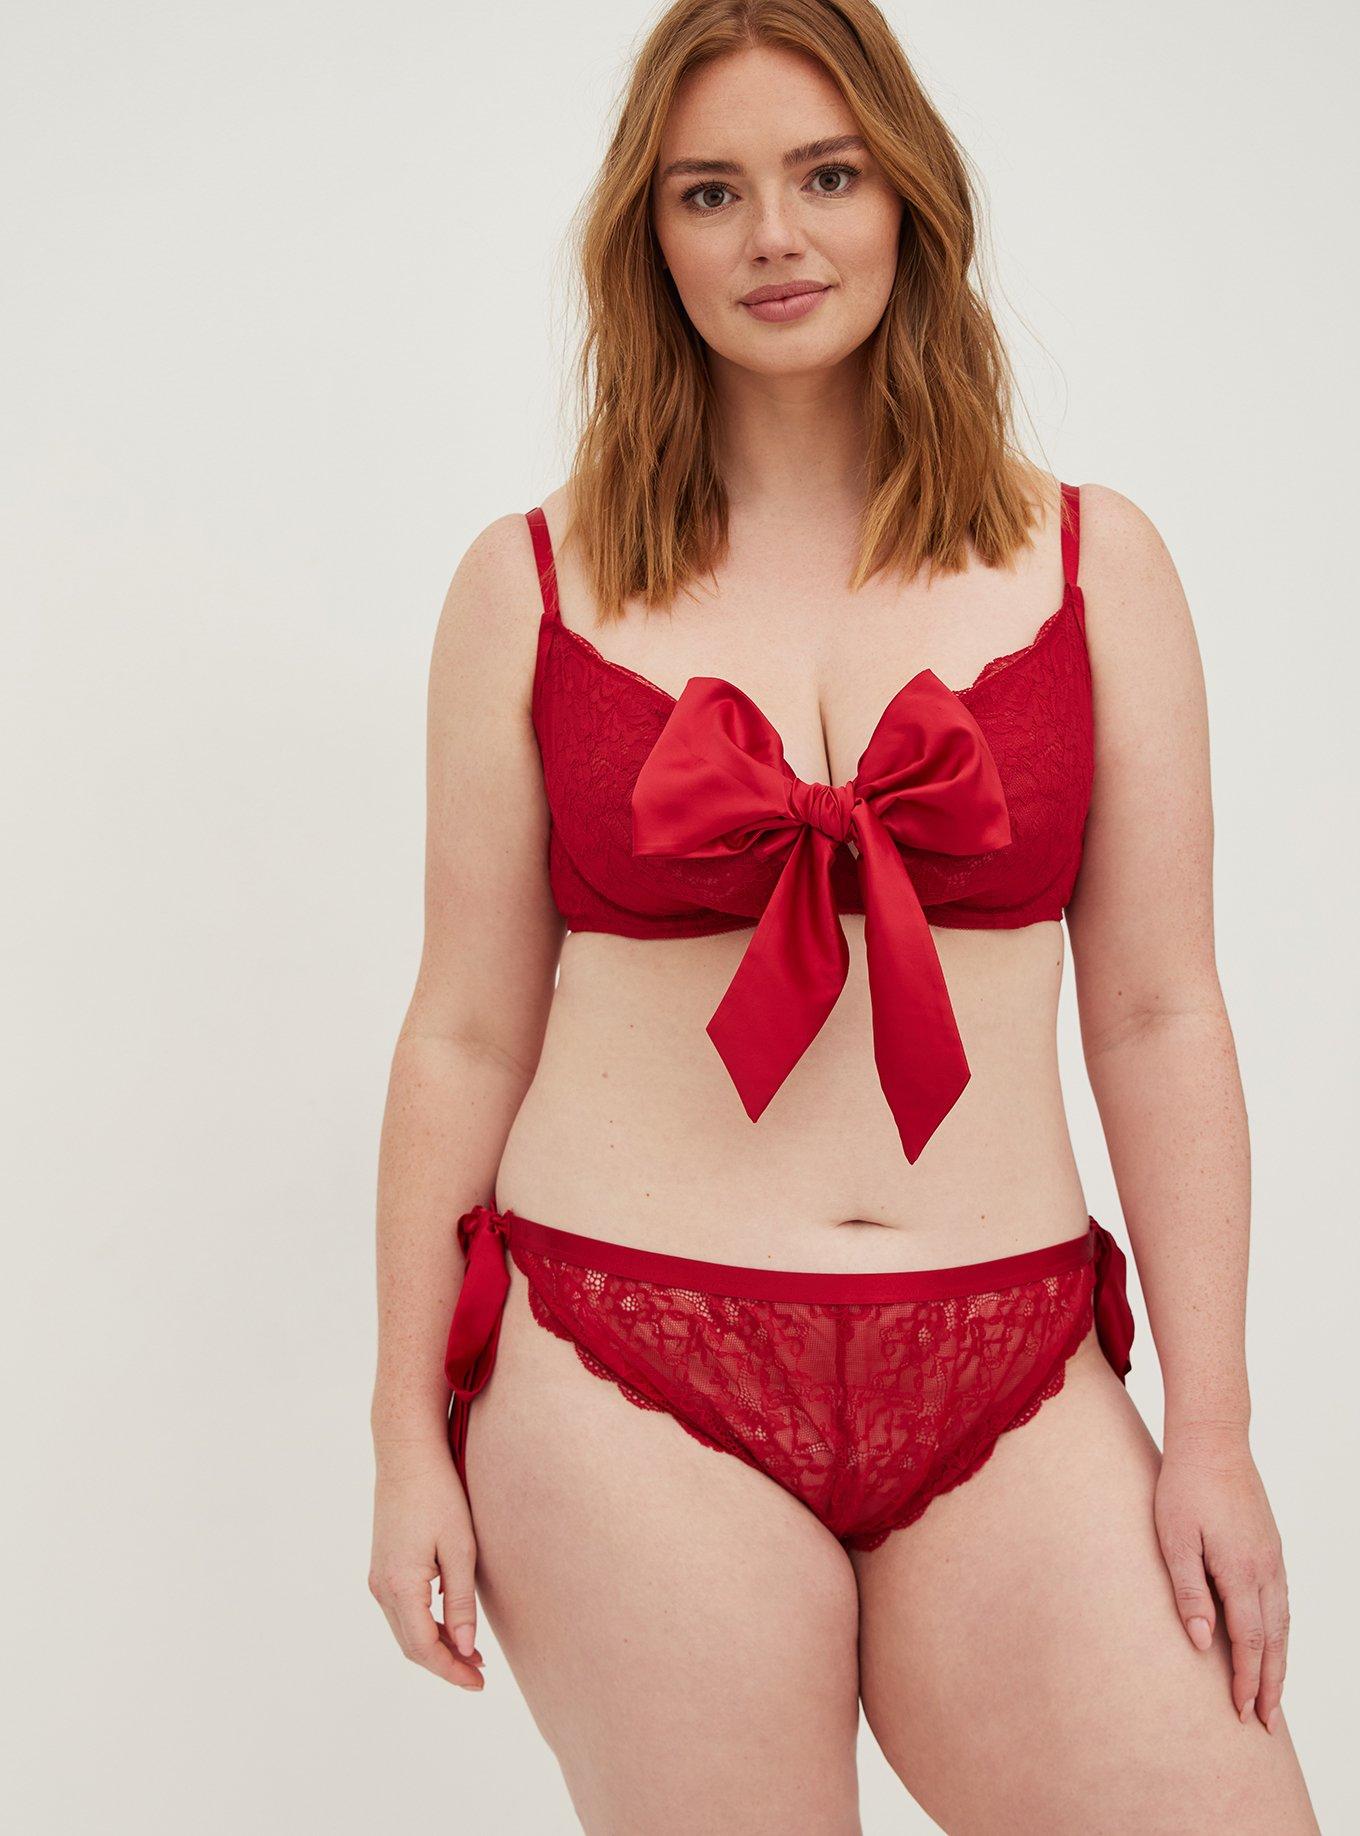 Plus Size - Tanga Panty - Lace Side Bow Red - Torrid